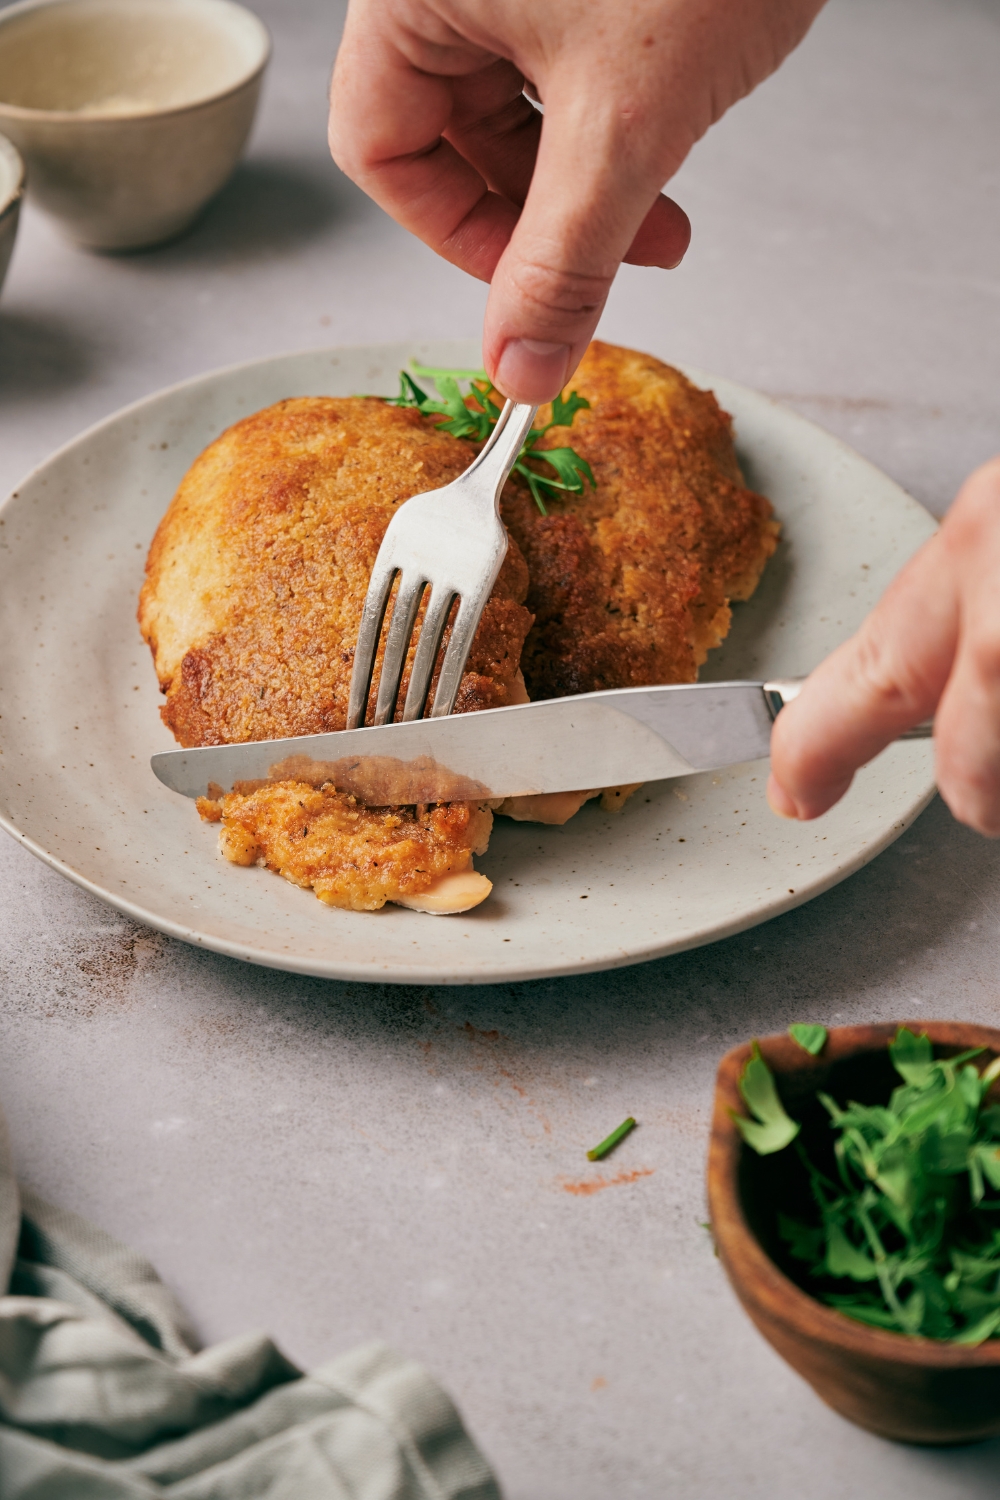 A hand using a fork and knife to slice a piece of baked chicken covered in crispy breading.